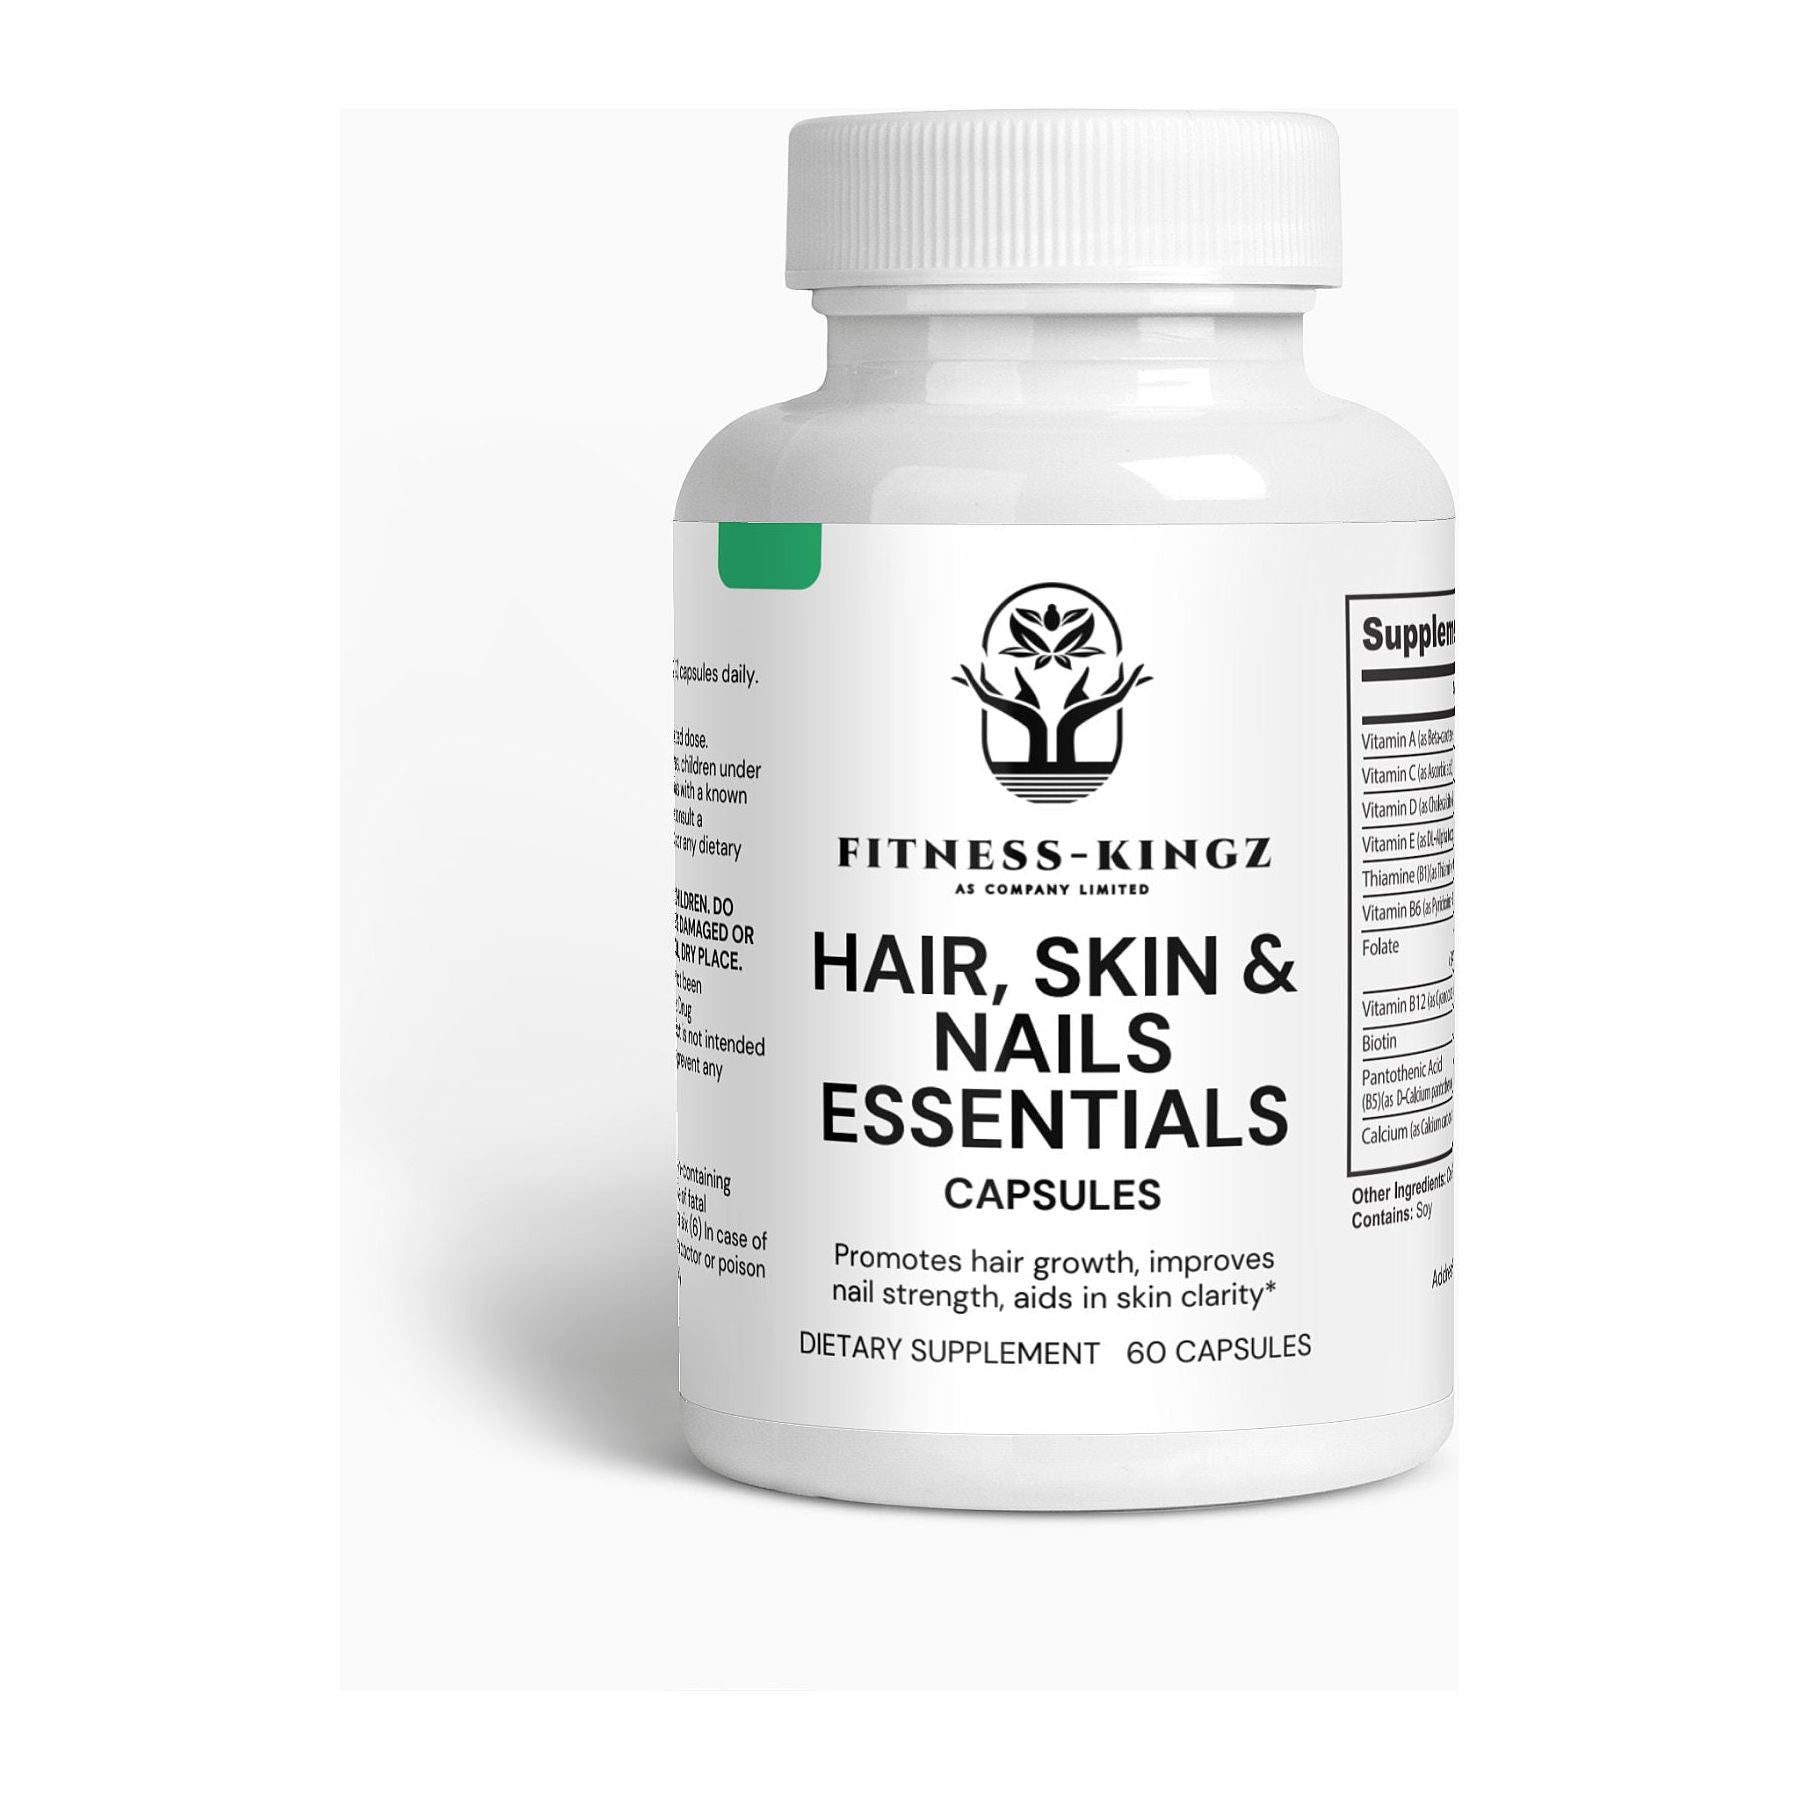 Fitness-Kingz Hair, Skin and Nails Essentials